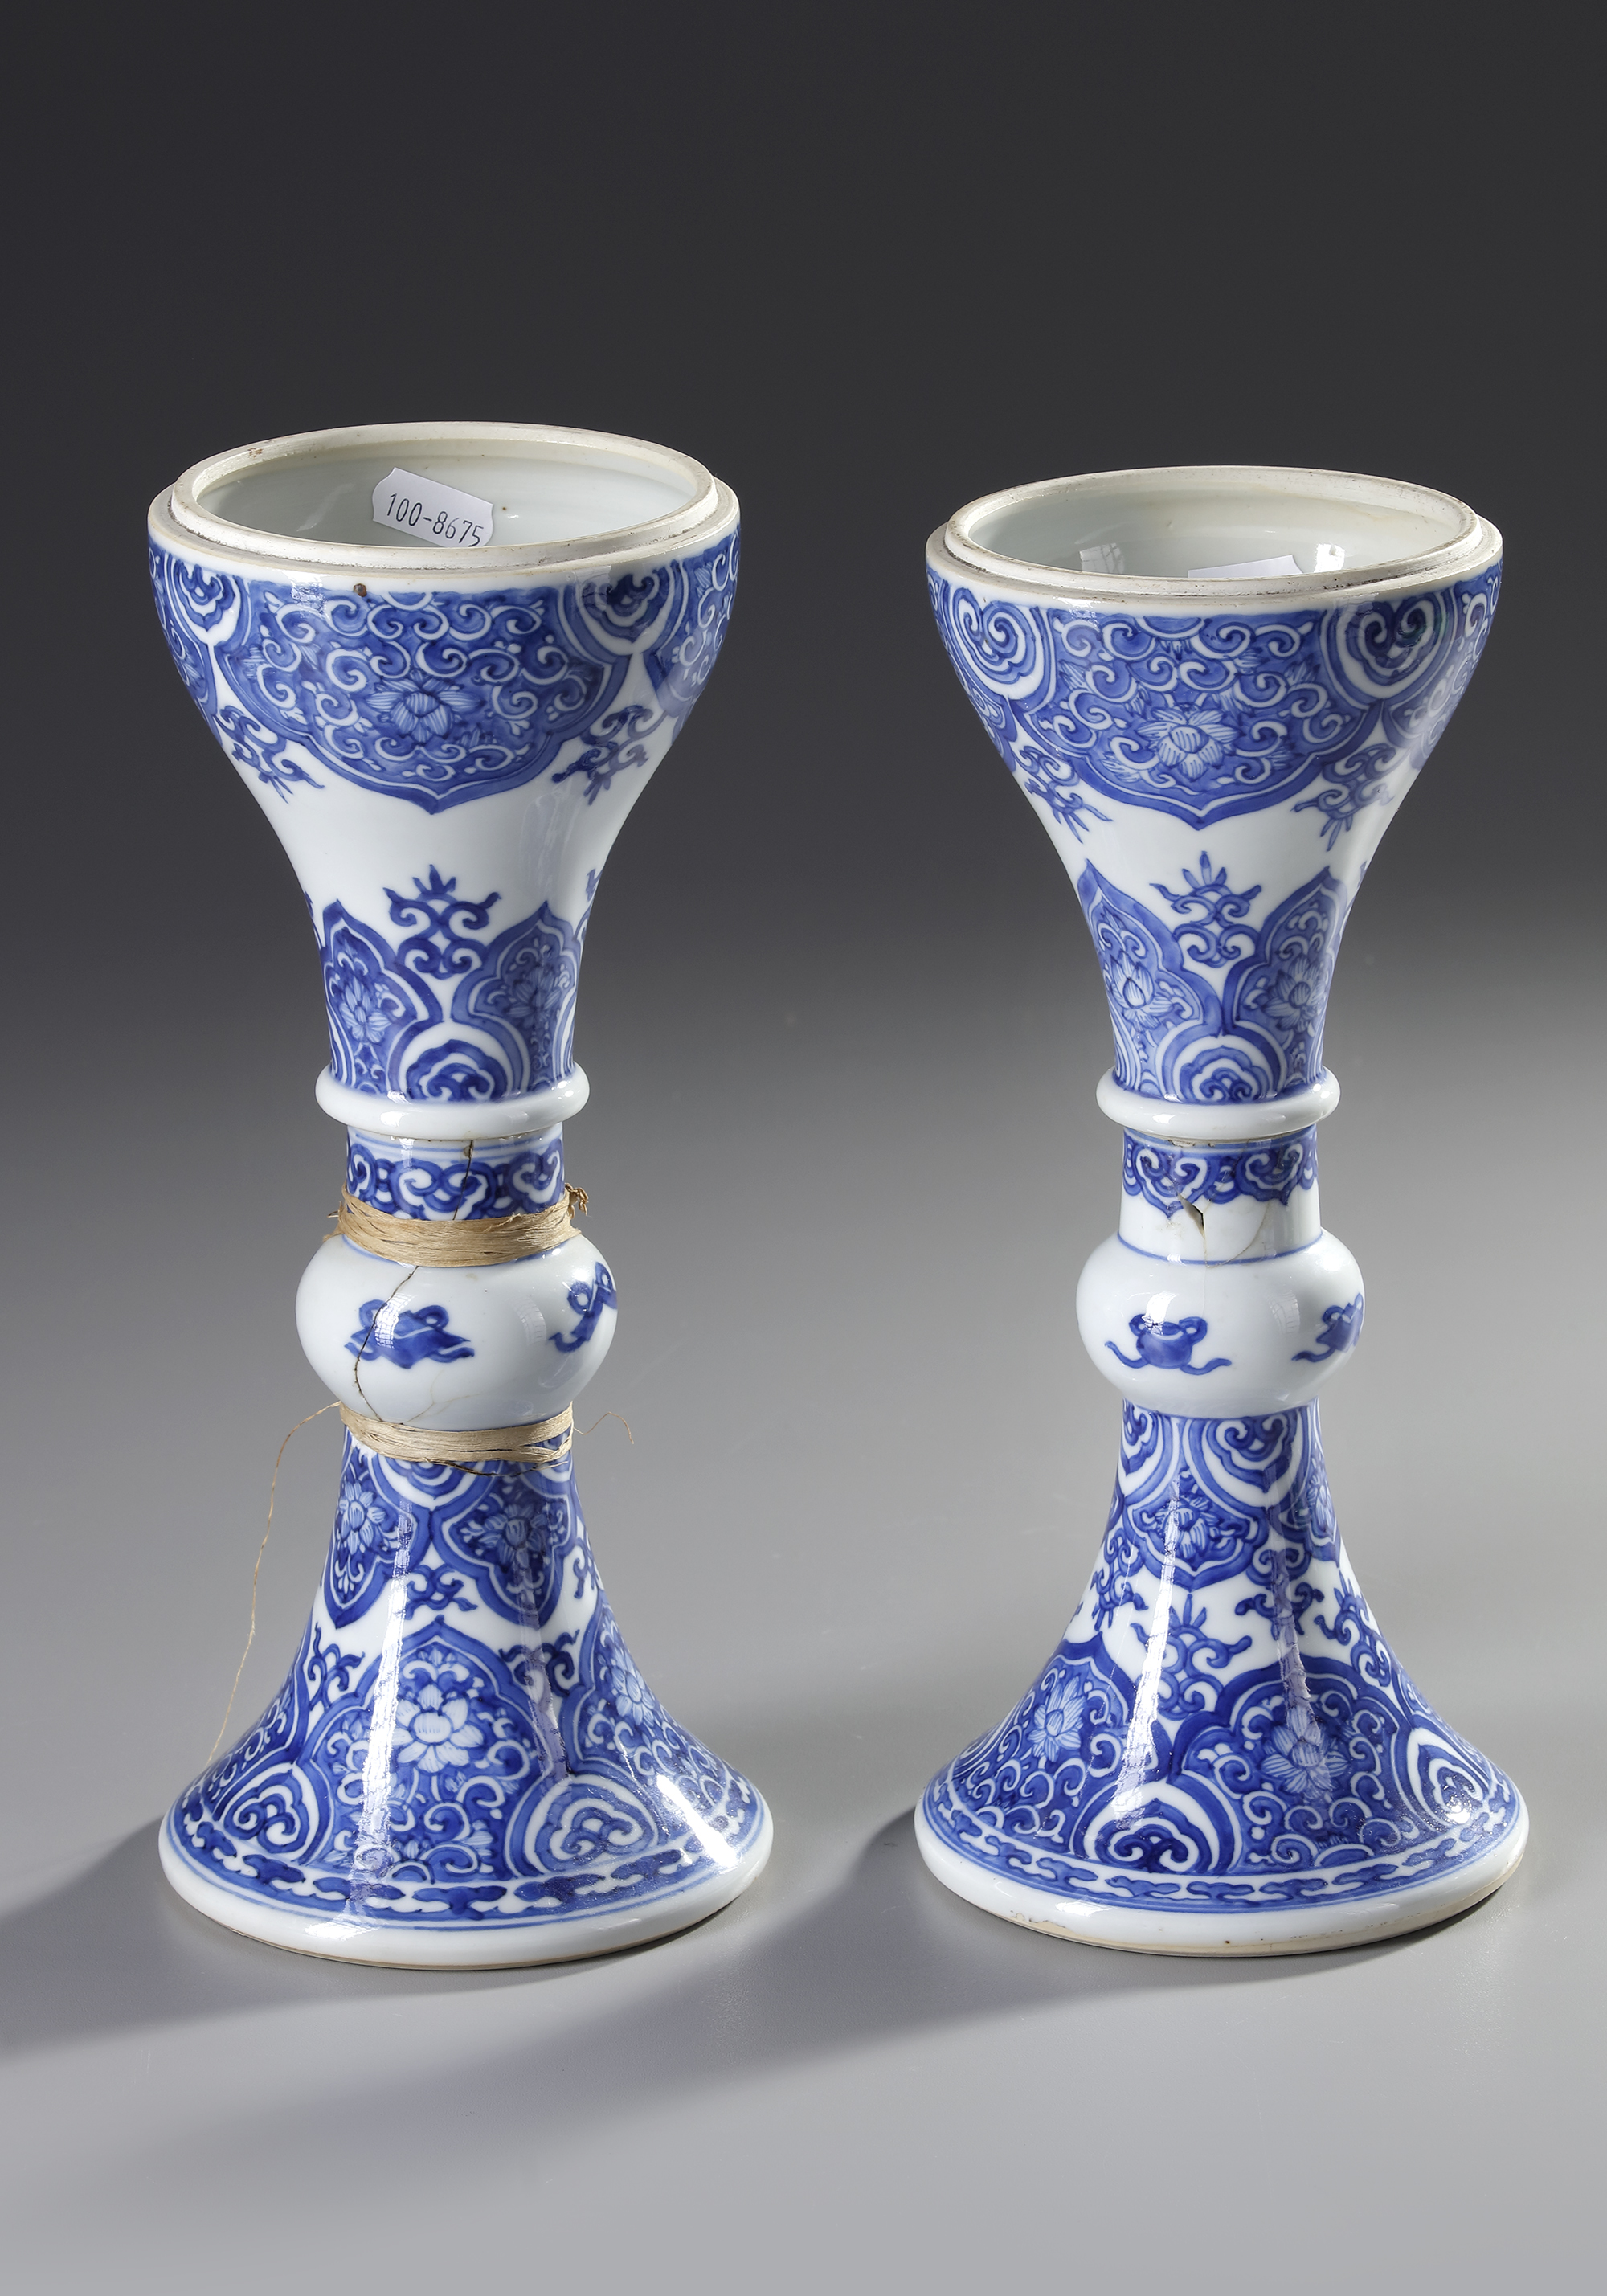 A PAIR OF BLUE AND WHITE POSSIBLY LANTERNS, KANGXI PERIOD (1662-1722) - Image 2 of 4